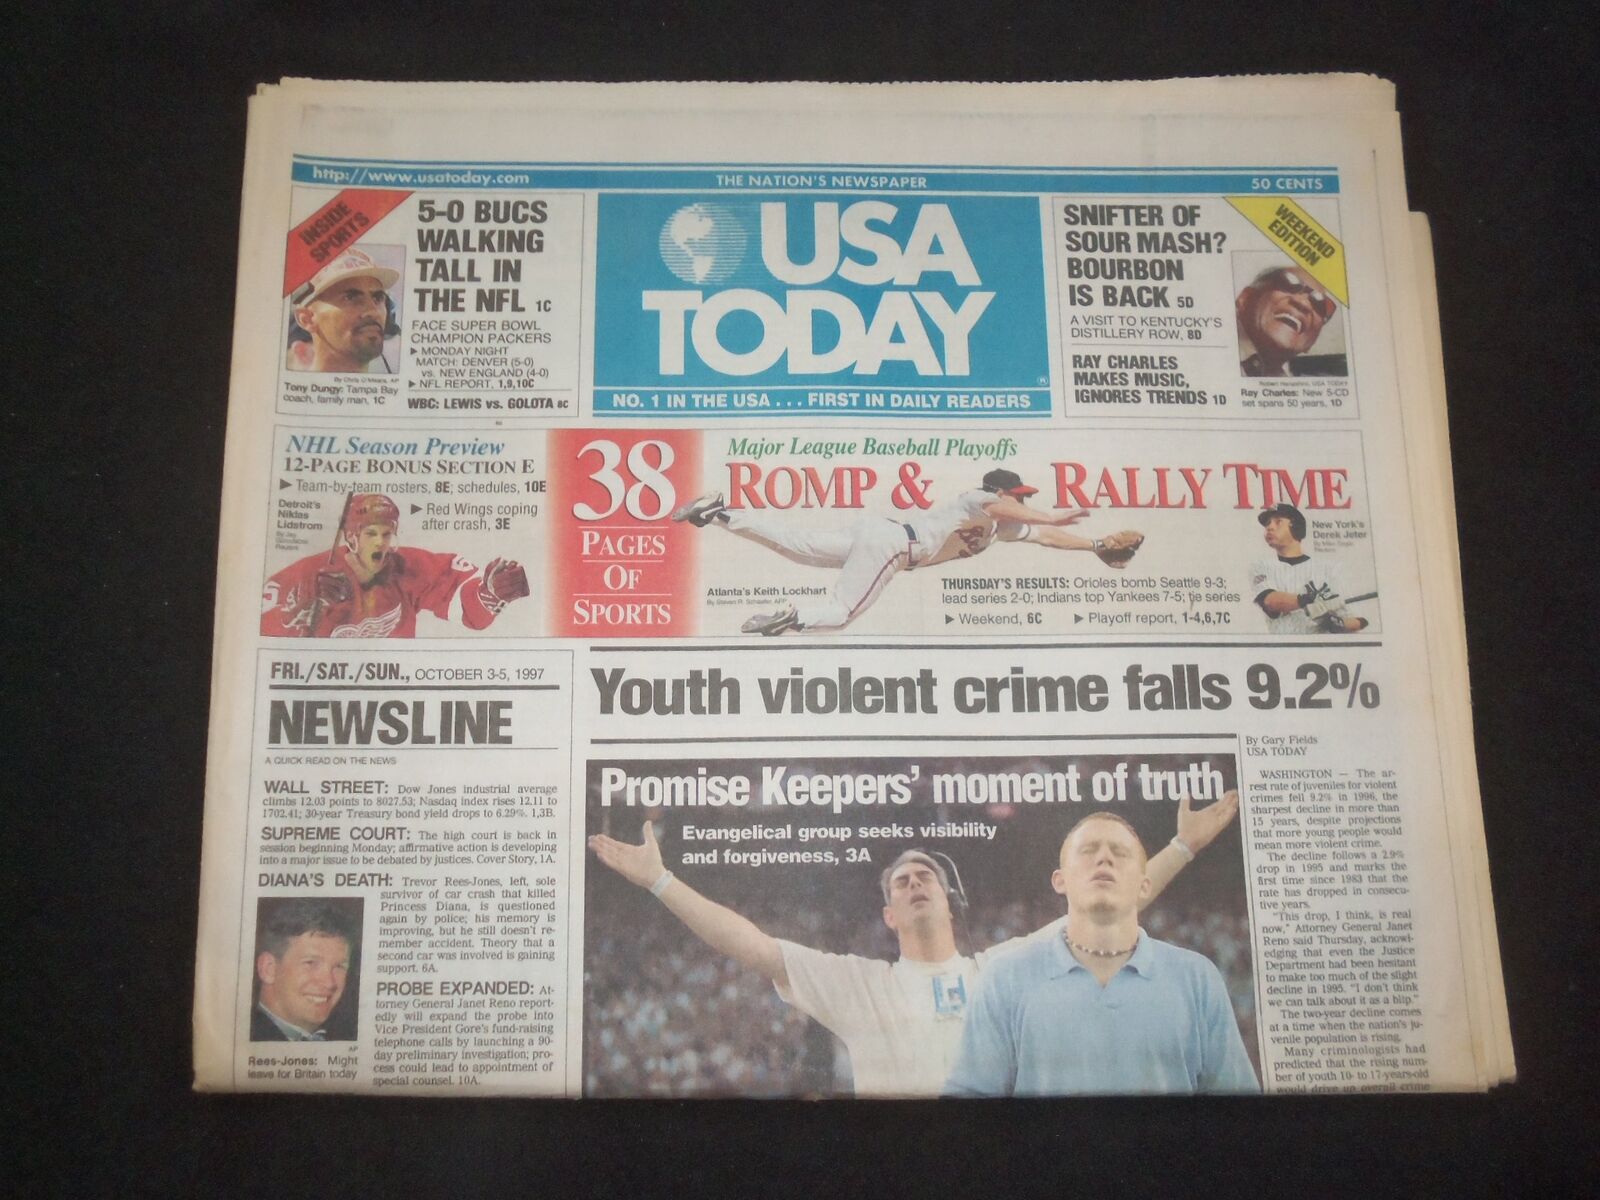 1997 OCTOBER 3-5 USA TODAY NEWSPAPER - YOUTH VIOLENT CRIME FALLS 9.2% - NP 7878